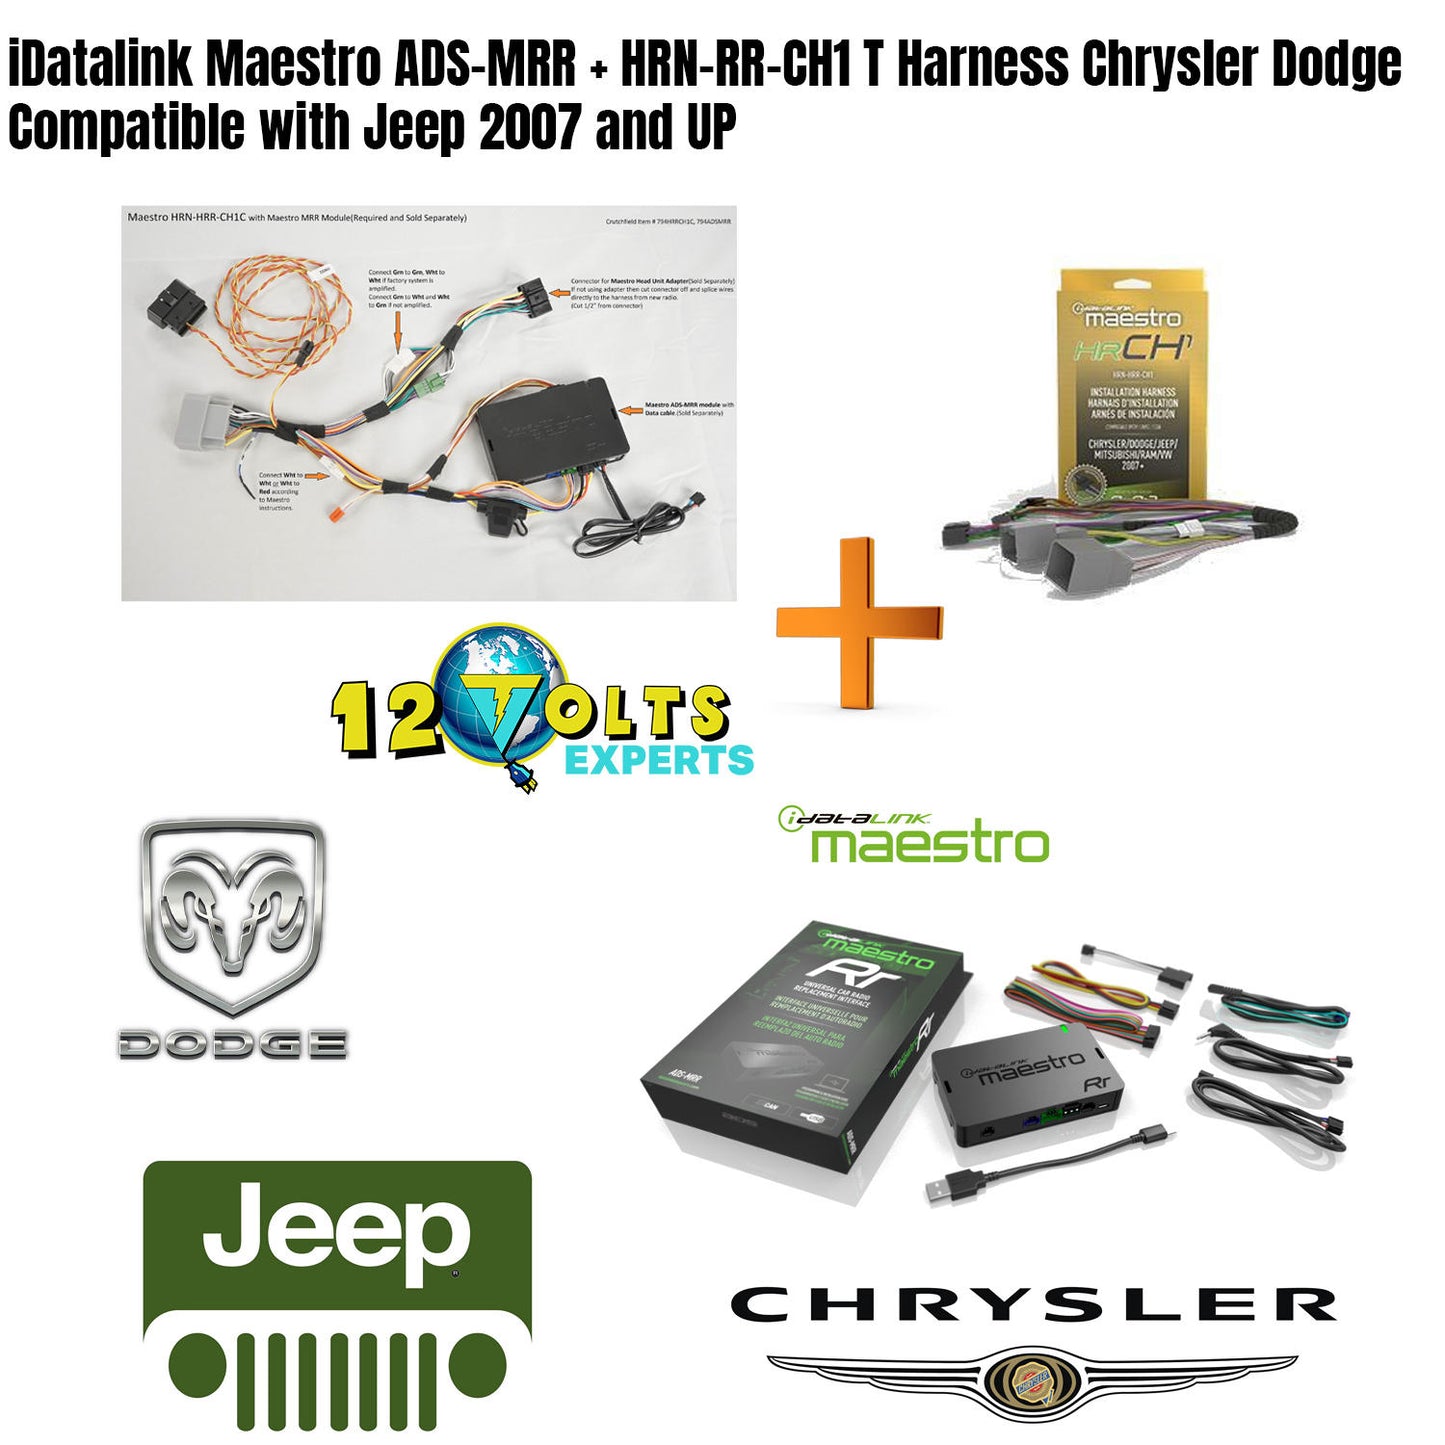 iDatalink MAESTRO ADS-MRR + HRN-RR-CH1 T Harness CHRYSLER DODGE JEEP 2007 and UP